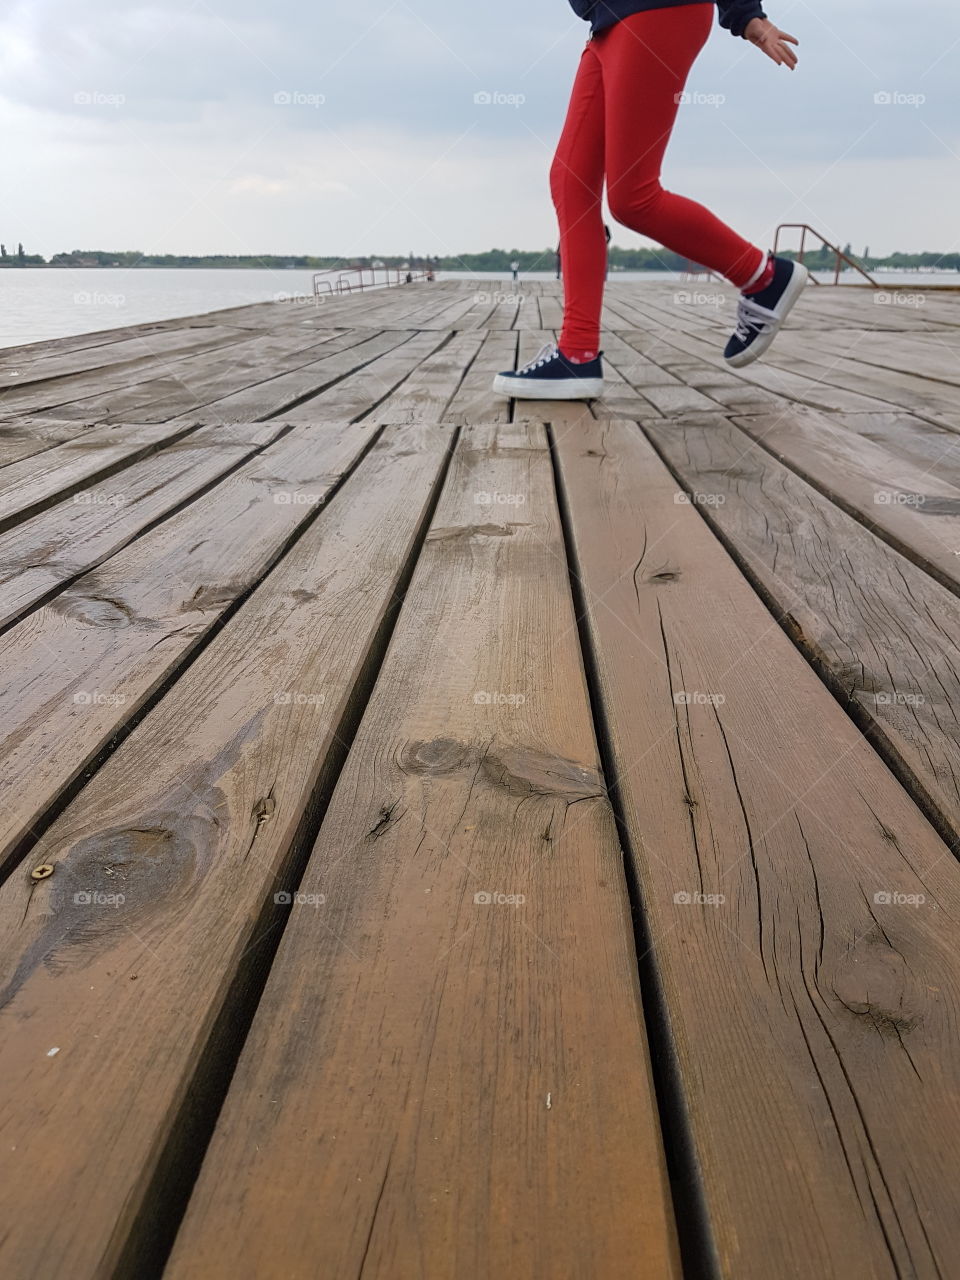 girl with red trousers on the lake dock